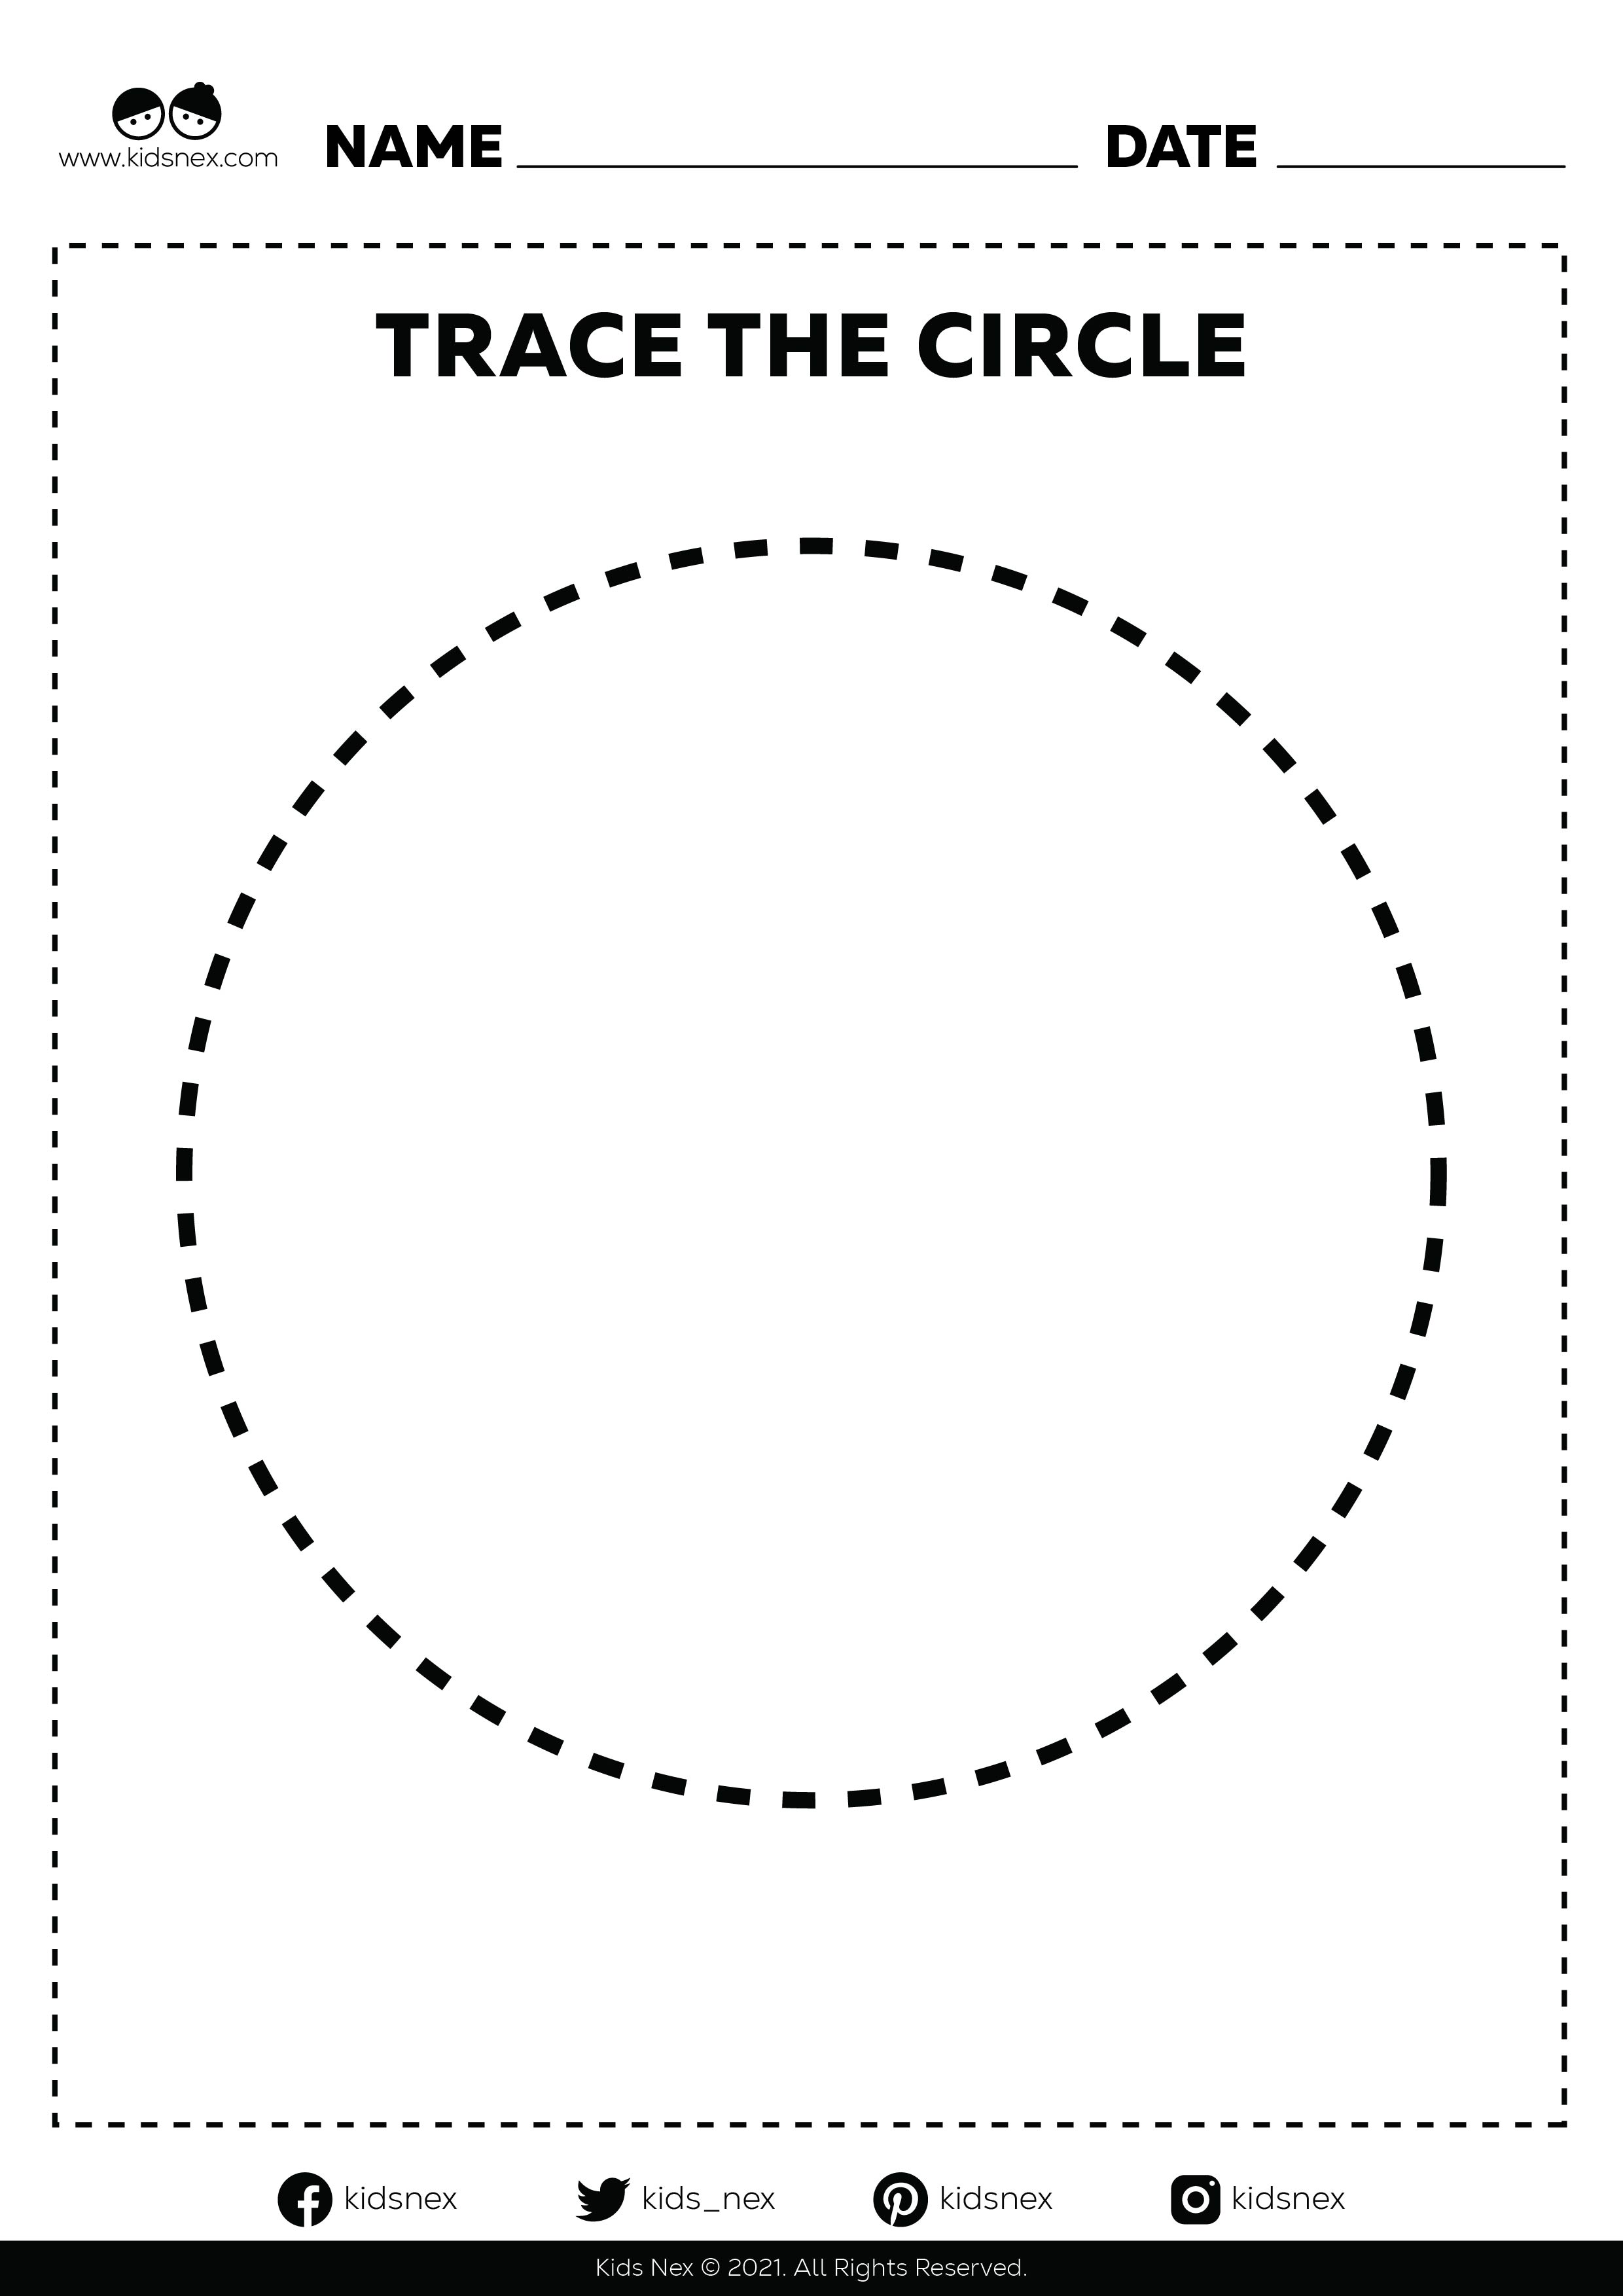 Trace and circle